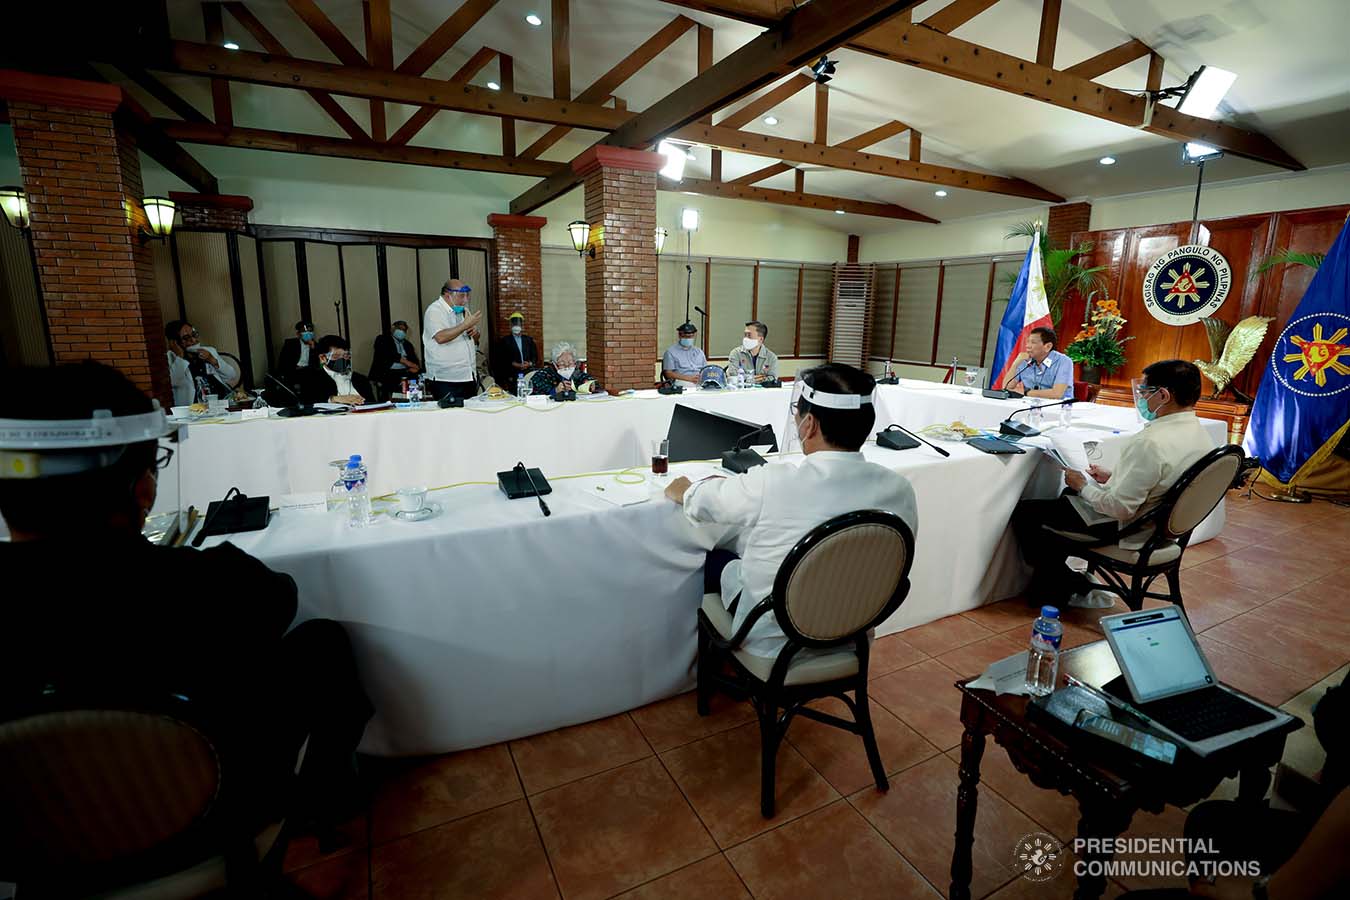 President Rodrigo Roa Duterte talks to the people after holding a meeting with the Inter-Agency Task Force on the Emerging Infectious Diseases (IATF-EID) core members at the Malago Clubhouse in Malacañang on July 15, 2020. SIMEON CELI JR./PRESIDENTIAL PHOTO